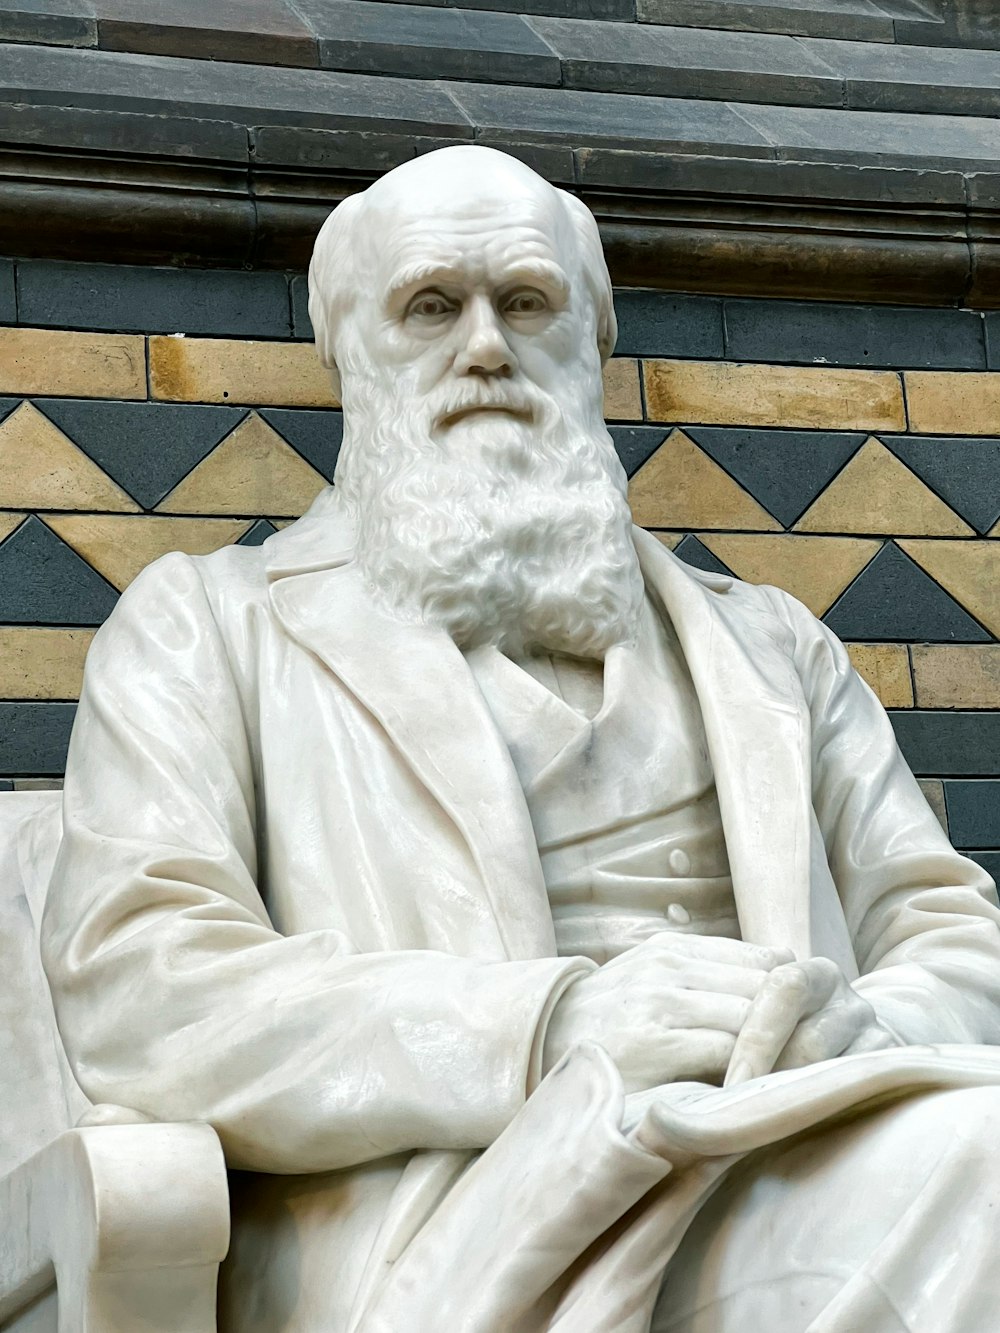 a statue of a man with a white beard